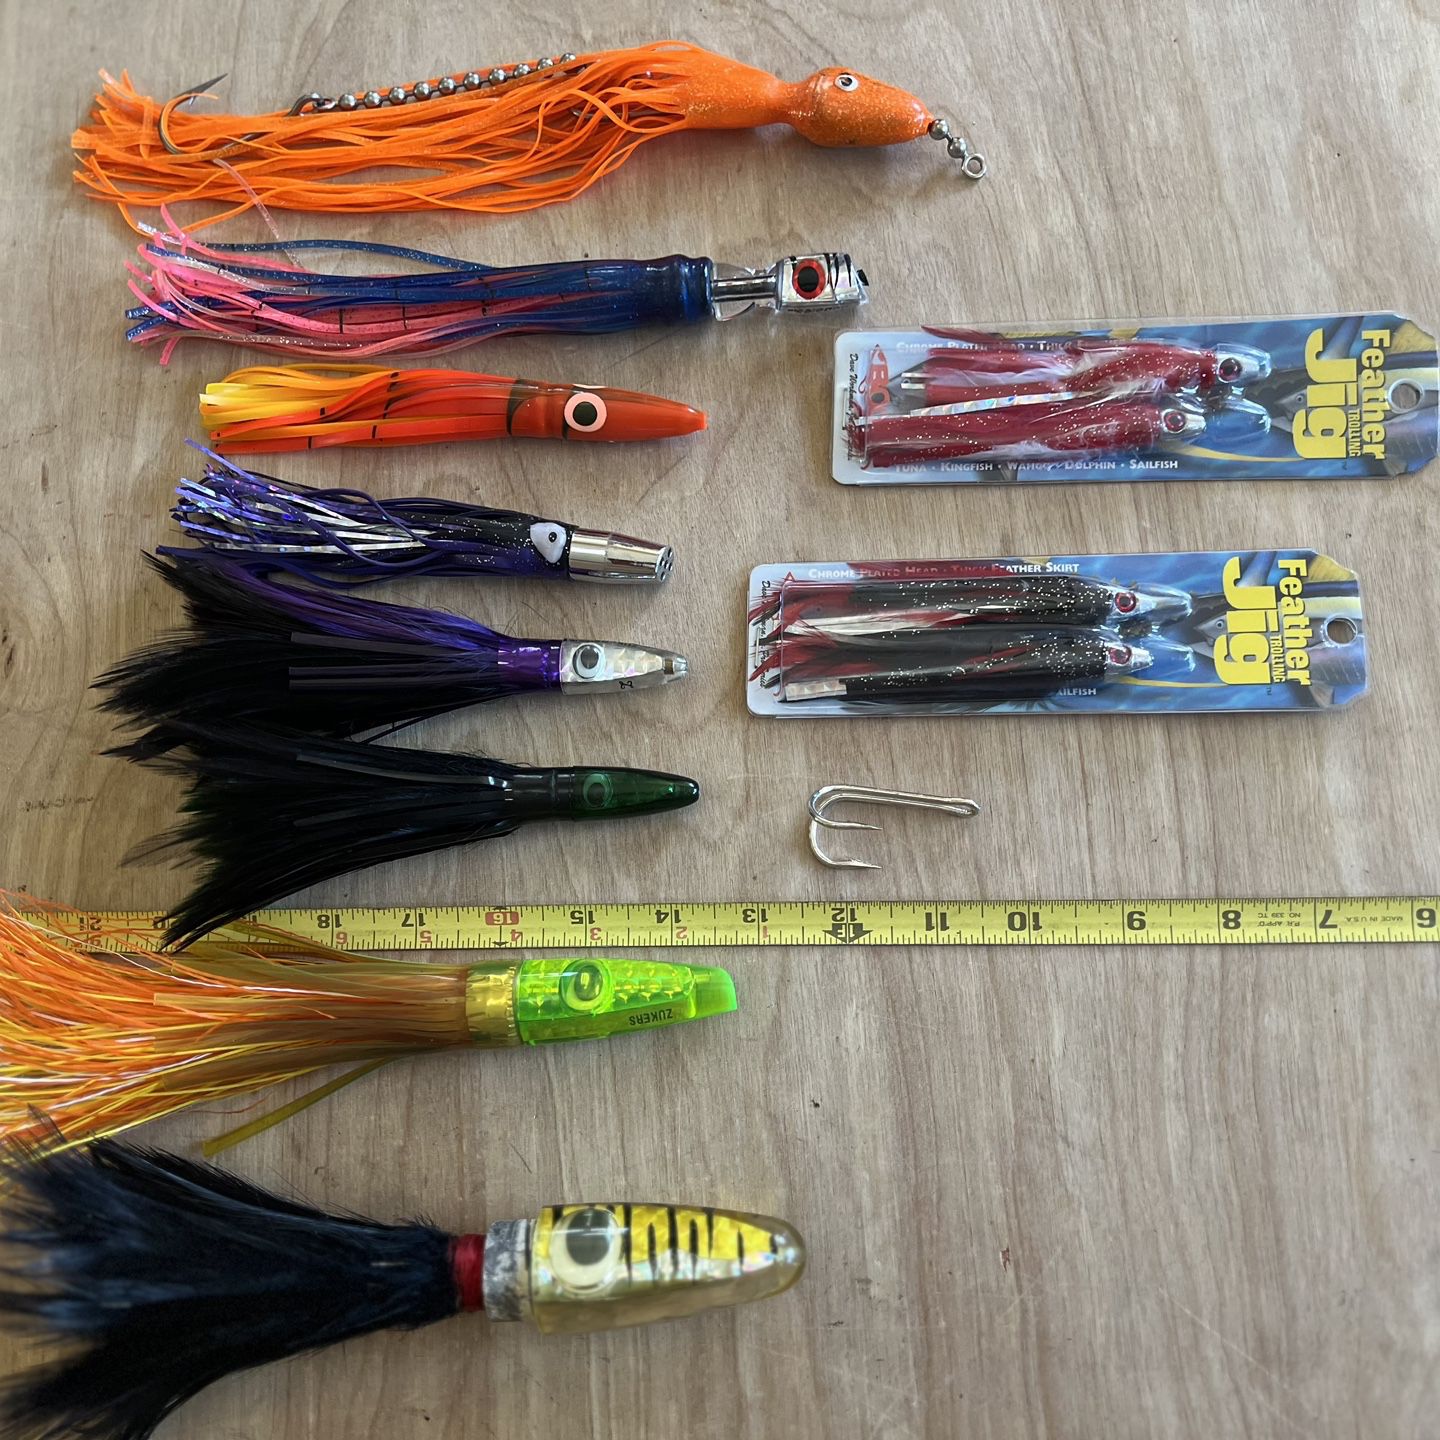 10 Saltwater Trolling Lures, Zukers, Boone, Jet head, 7strand